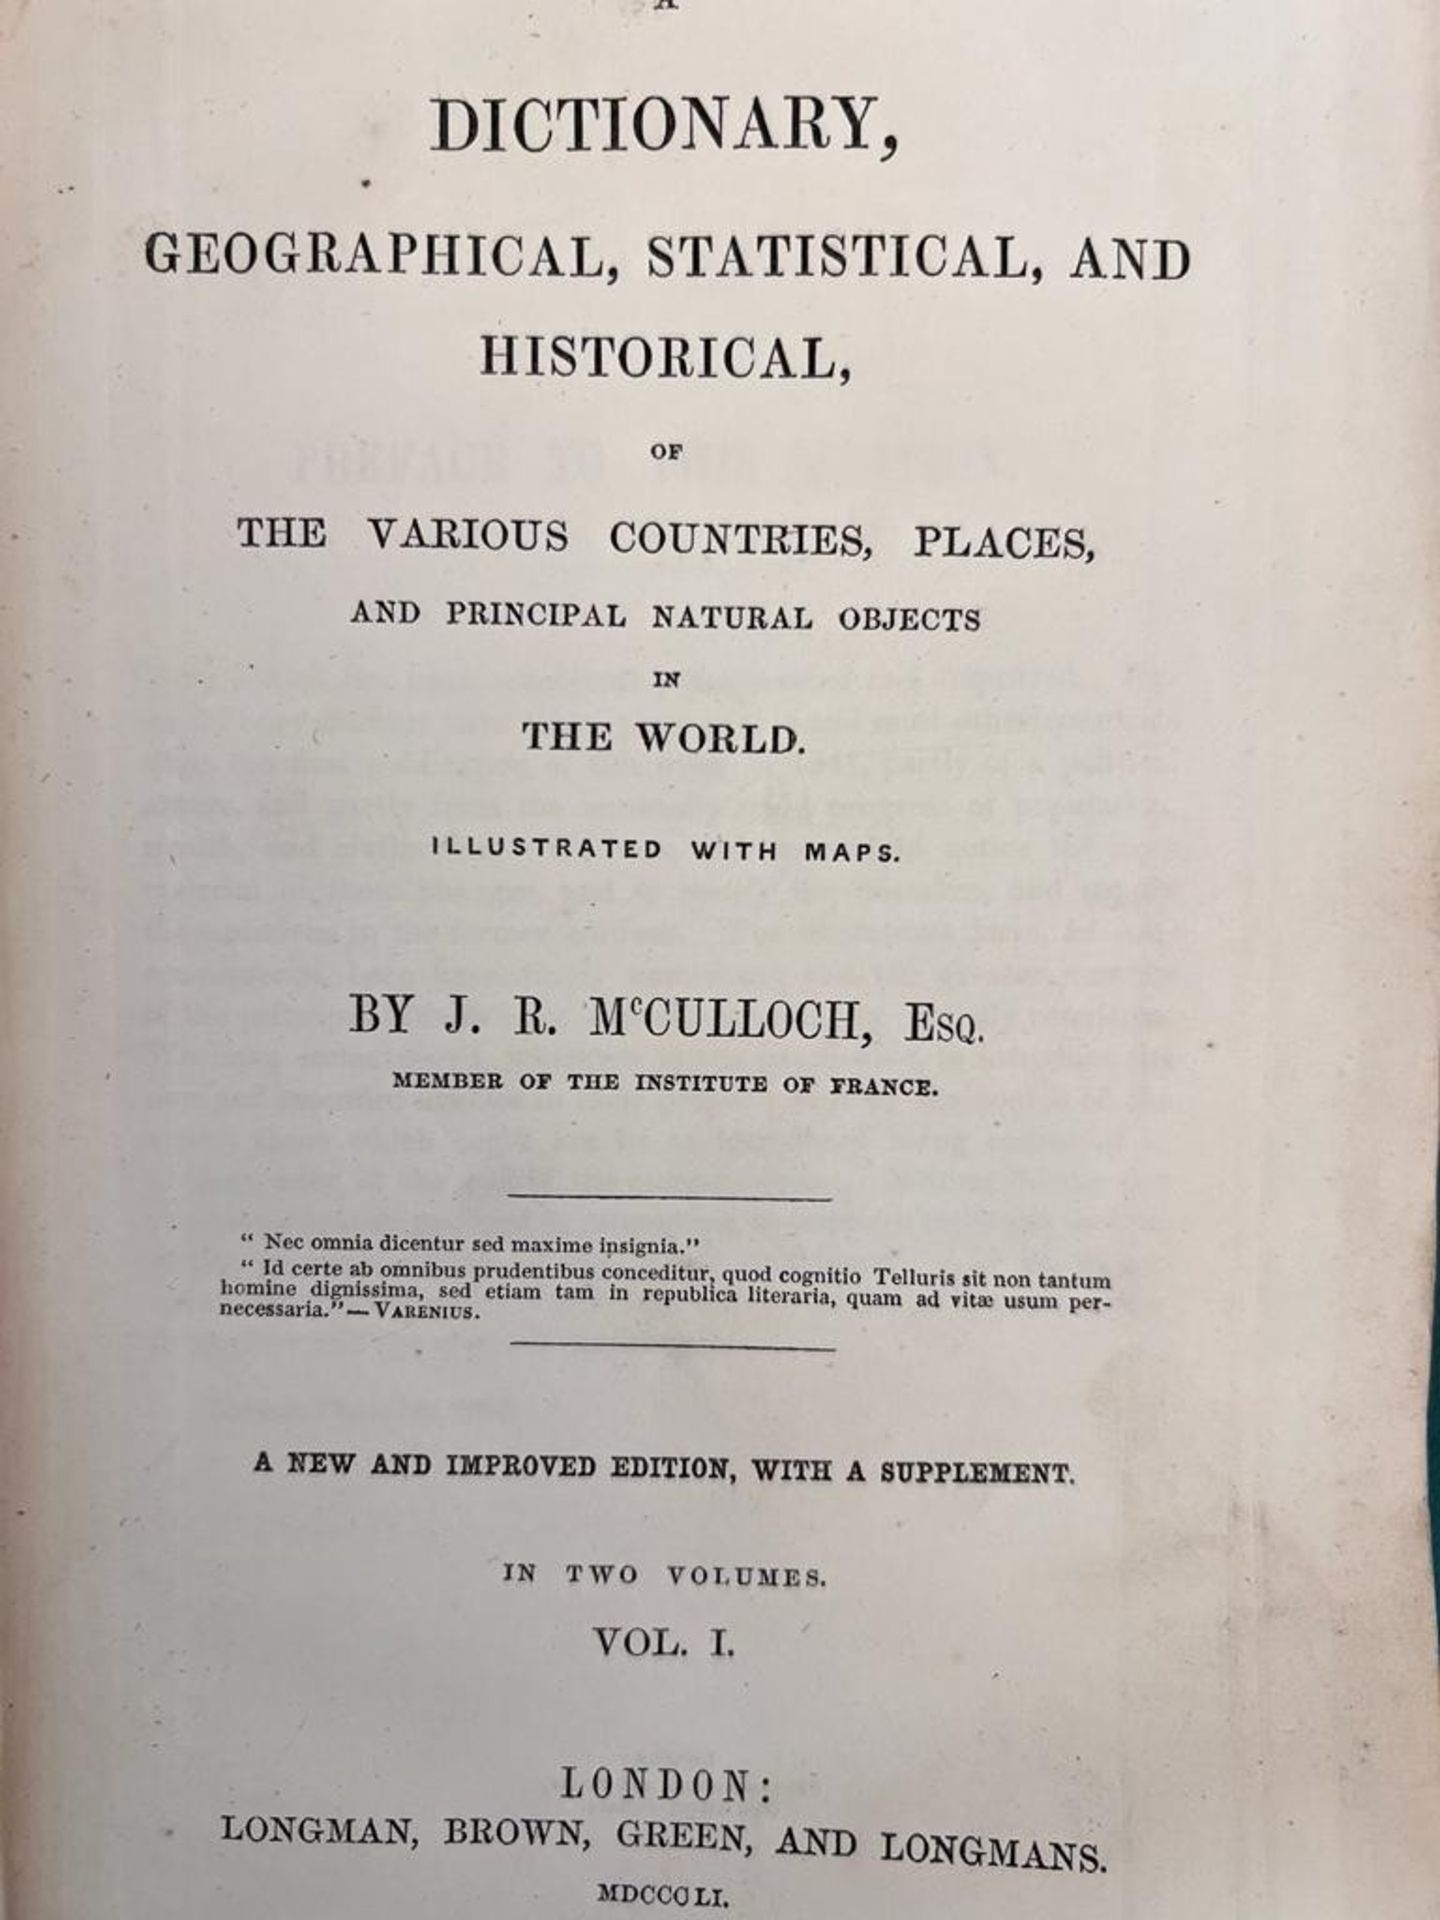 McCULLOCH'S, GEOGRAPHICAL, STATISTICAL AND HISTORICAL WITH MAPS, 1851, CLOTH BOARDS, TWO VOLUMES AND - Image 2 of 4